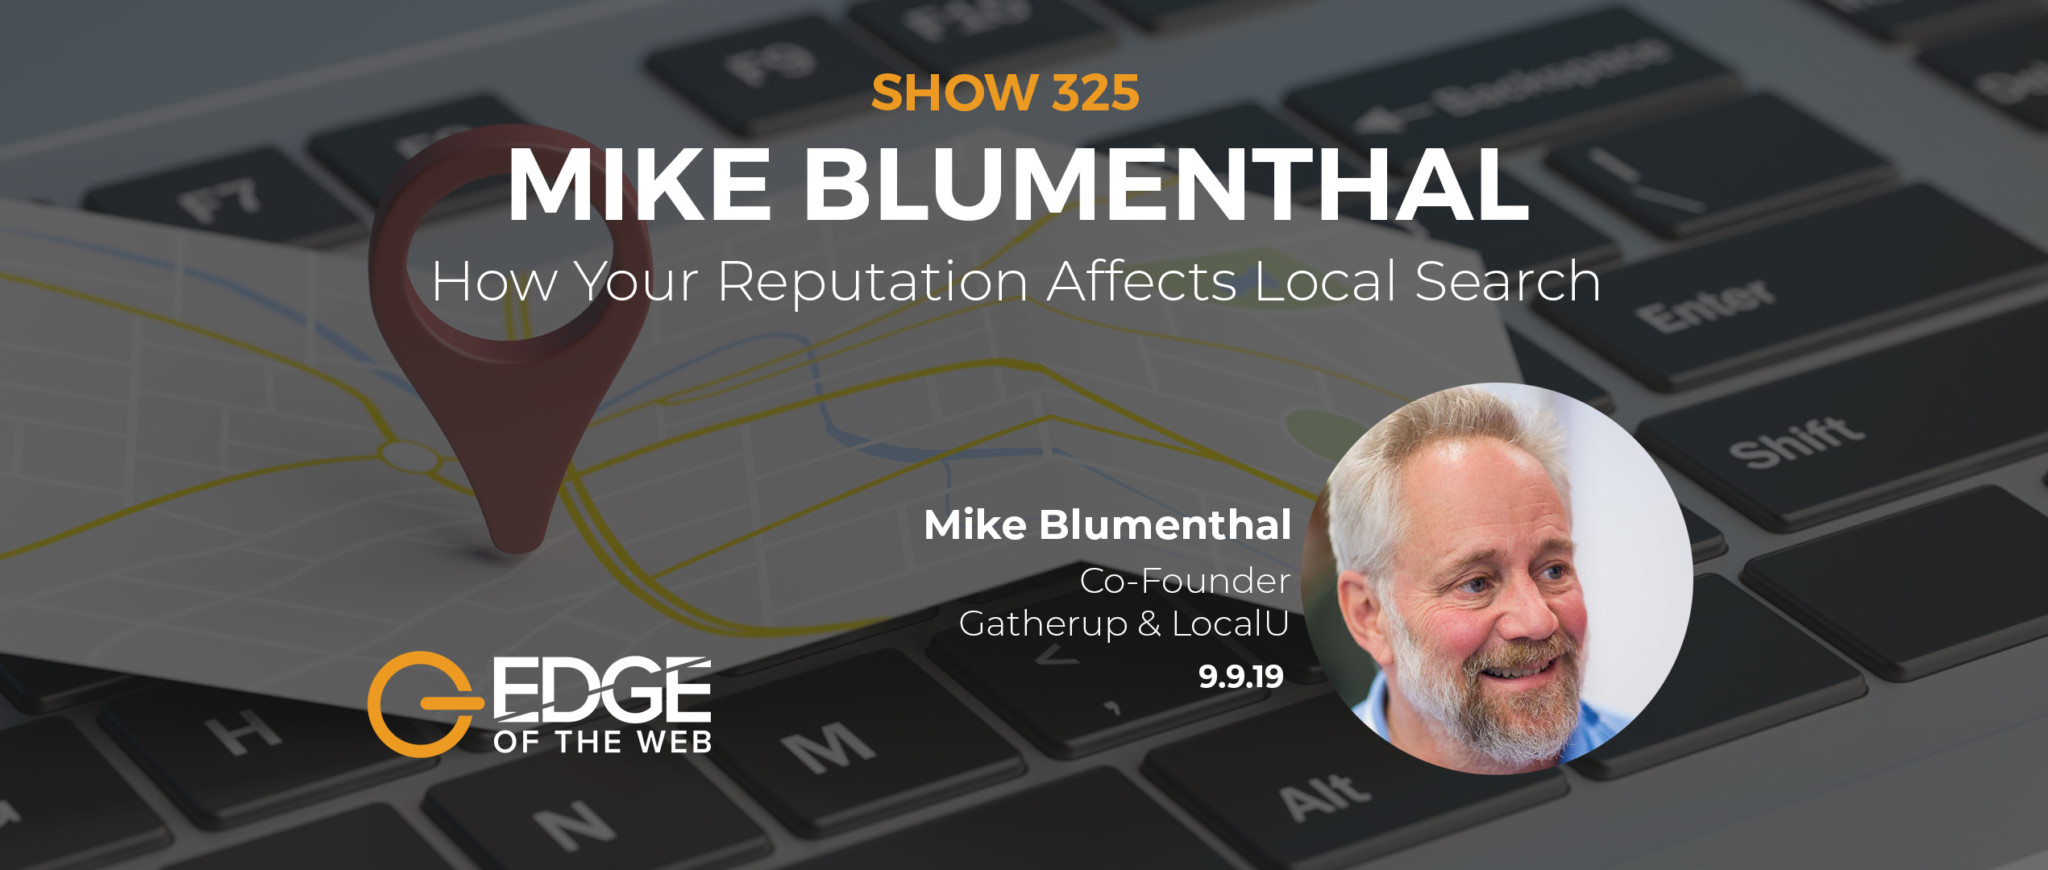 Show 325: How your reputation affects local search, featuring Mike Blumenthal